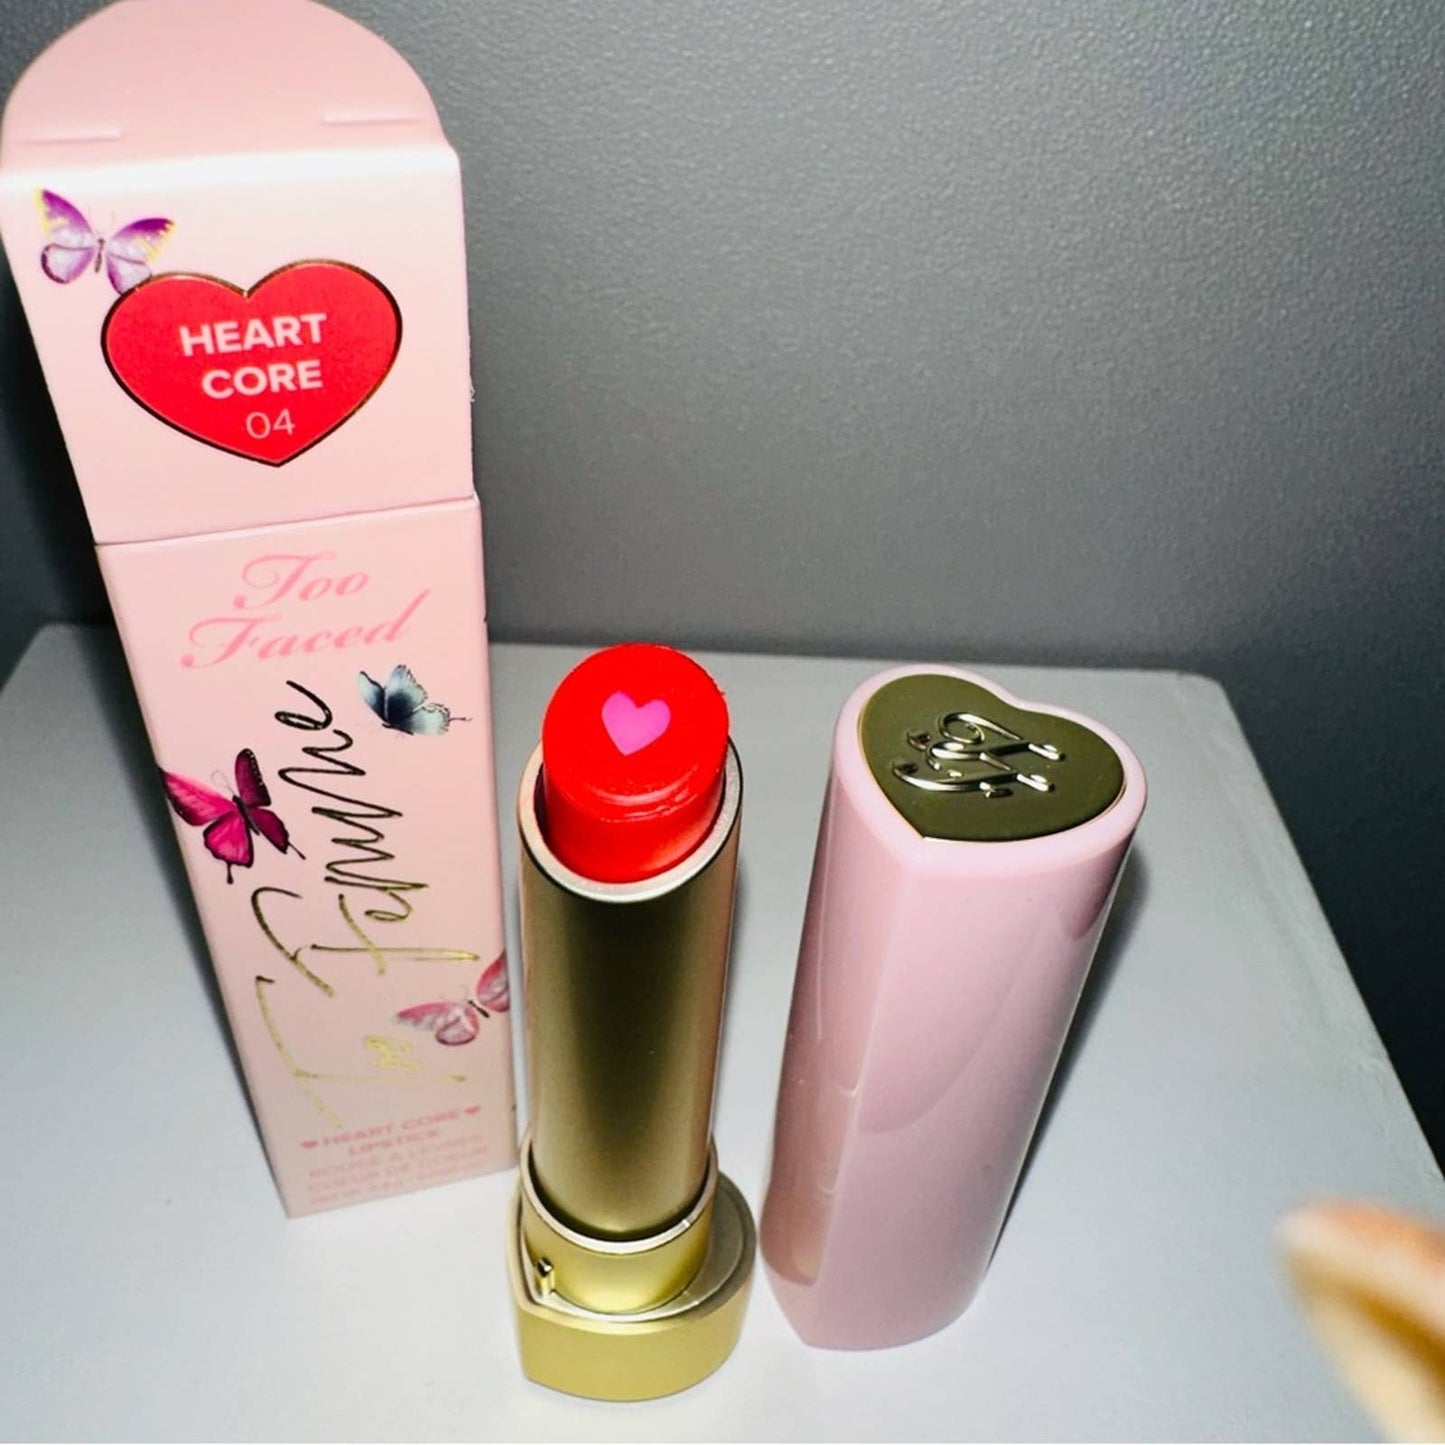 Too Faced Too Femme Heart Core Lipstick Shade 04